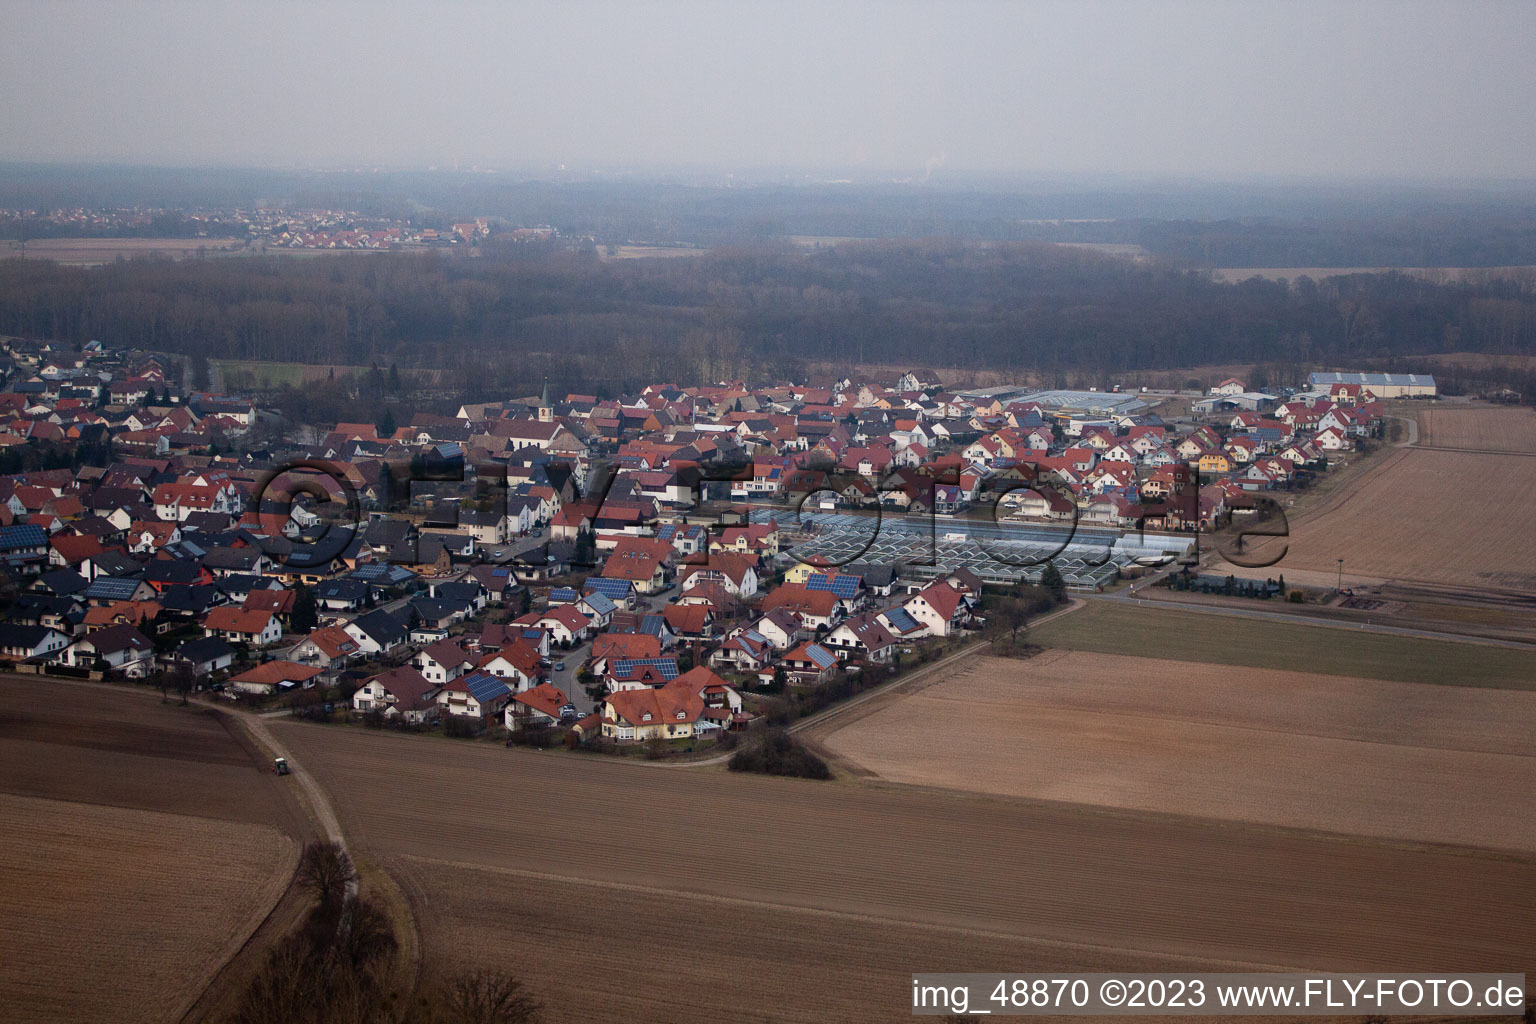 Kuhardt in the state Rhineland-Palatinate, Germany seen from above